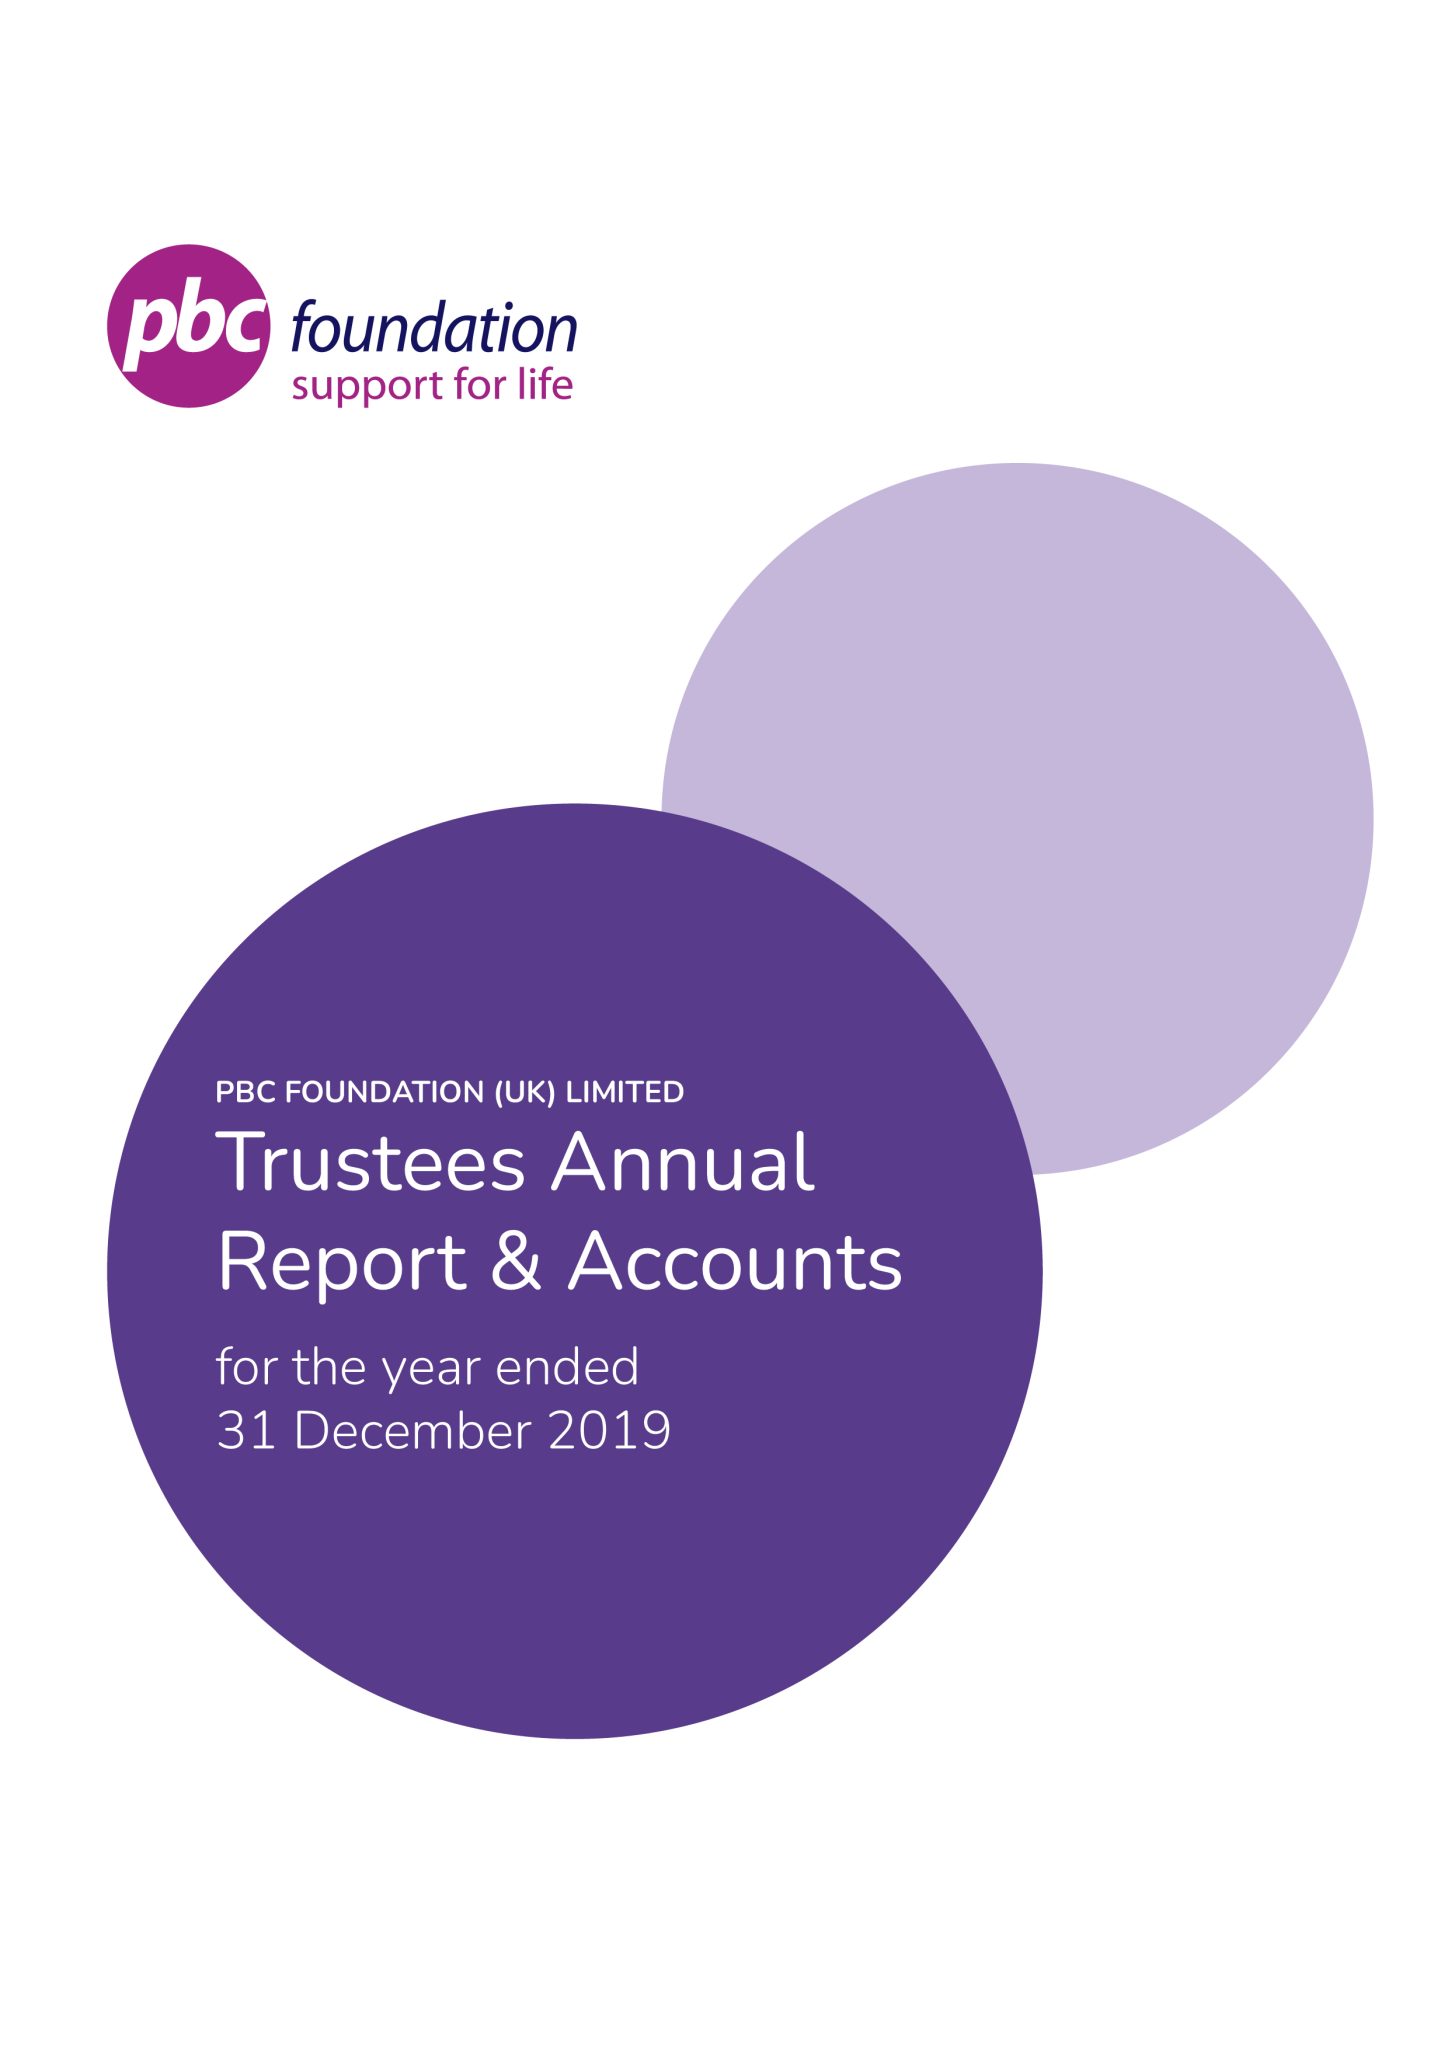 The cover of the PBC Foundation annual report and accounts for year ending 2019